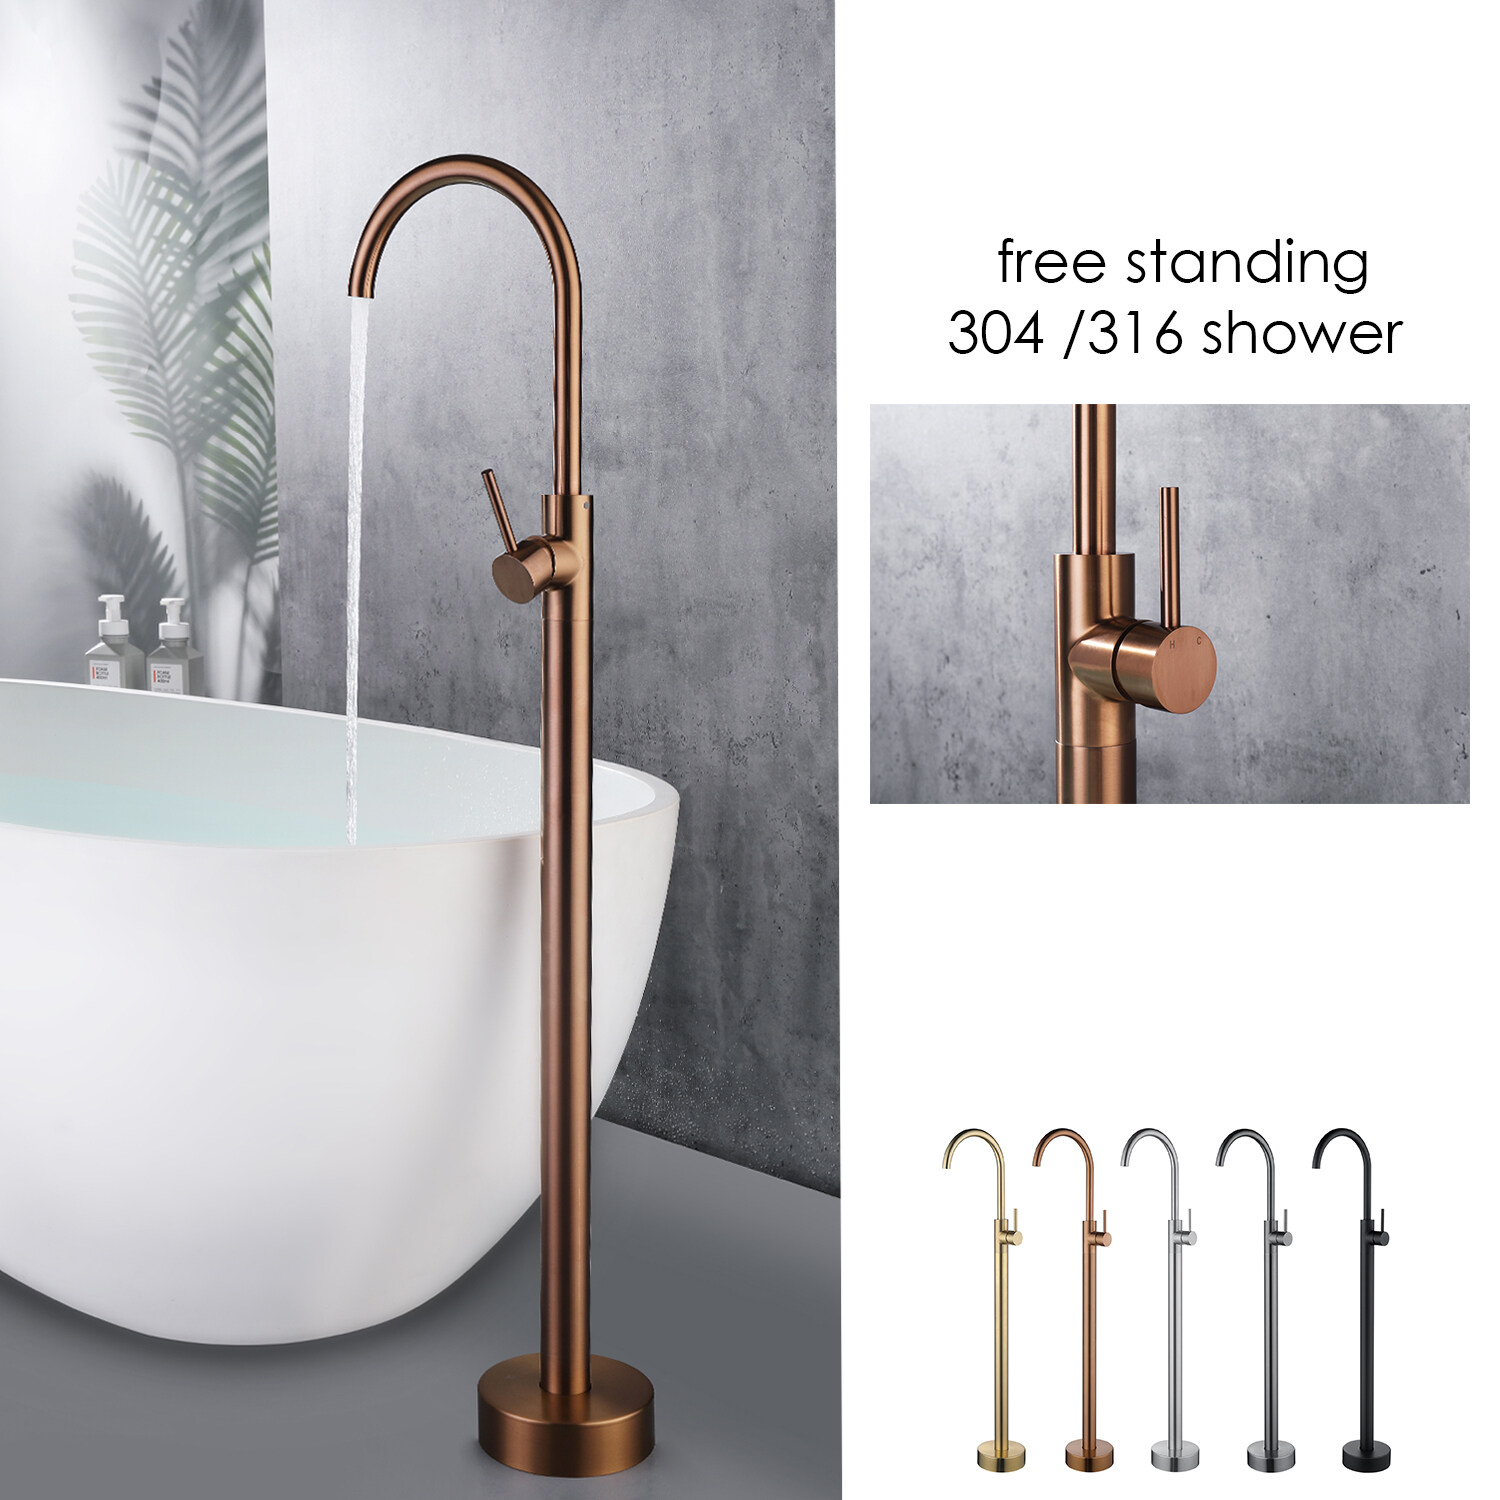 The Thermostatic Bath Shower Mixer: An Essential Addition to Your Bathroom